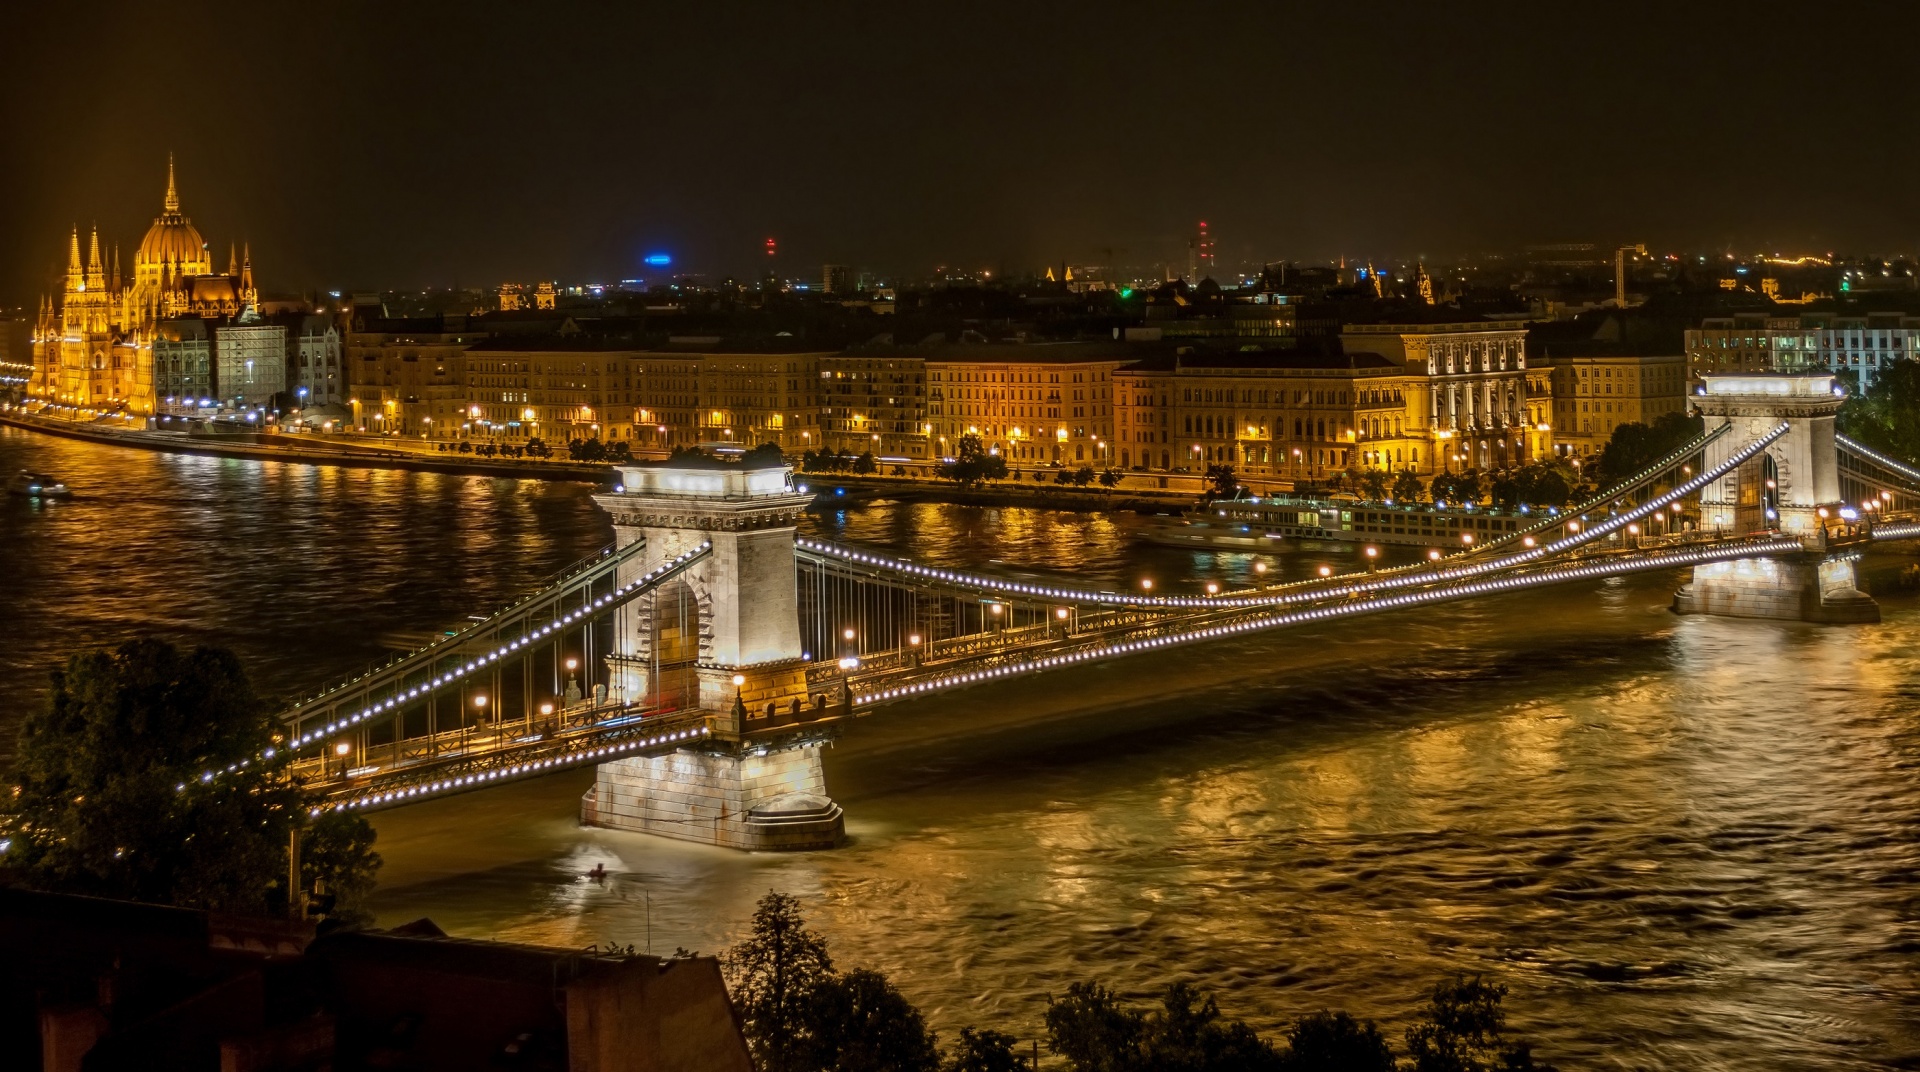 Night view of the Széchenyi Chain Bridge spanning the Danube River in Budapest, Hungary